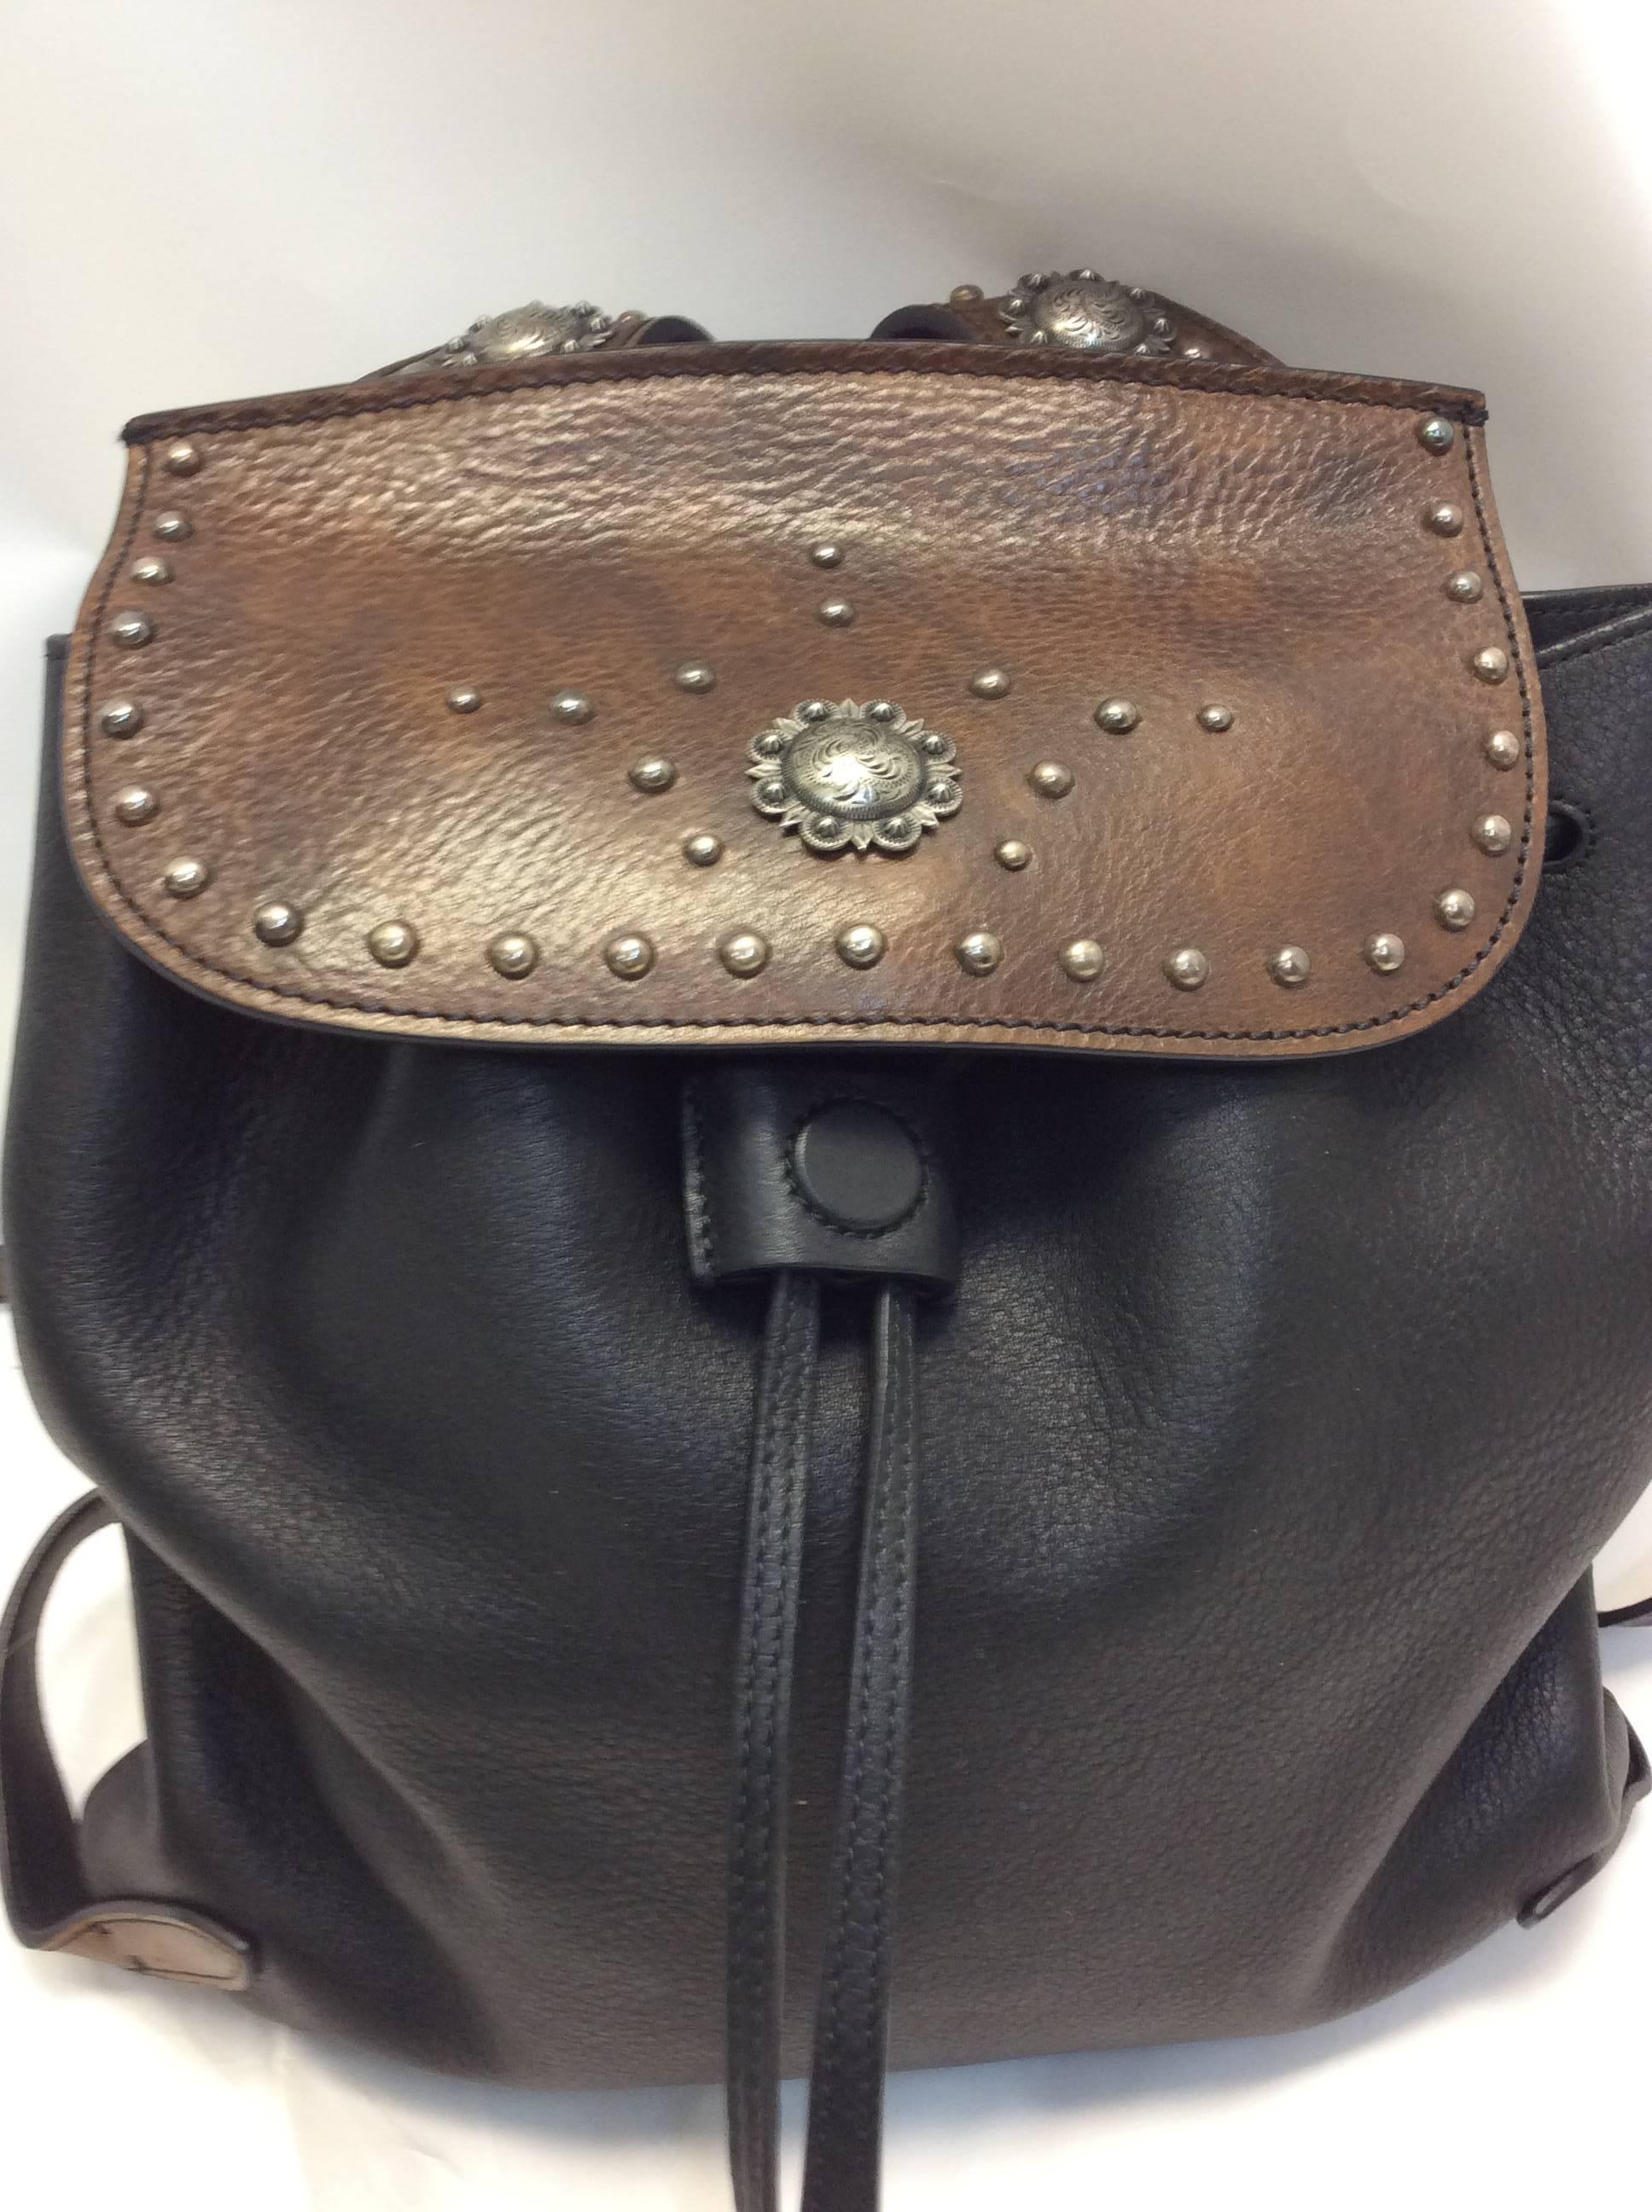 Ralph Lauren Two Tone Embellished Backpack
$350
Black and brown two tone coloring
100% leather
Silver hardware detailing 
Interior is fully lined 
Made in Italy